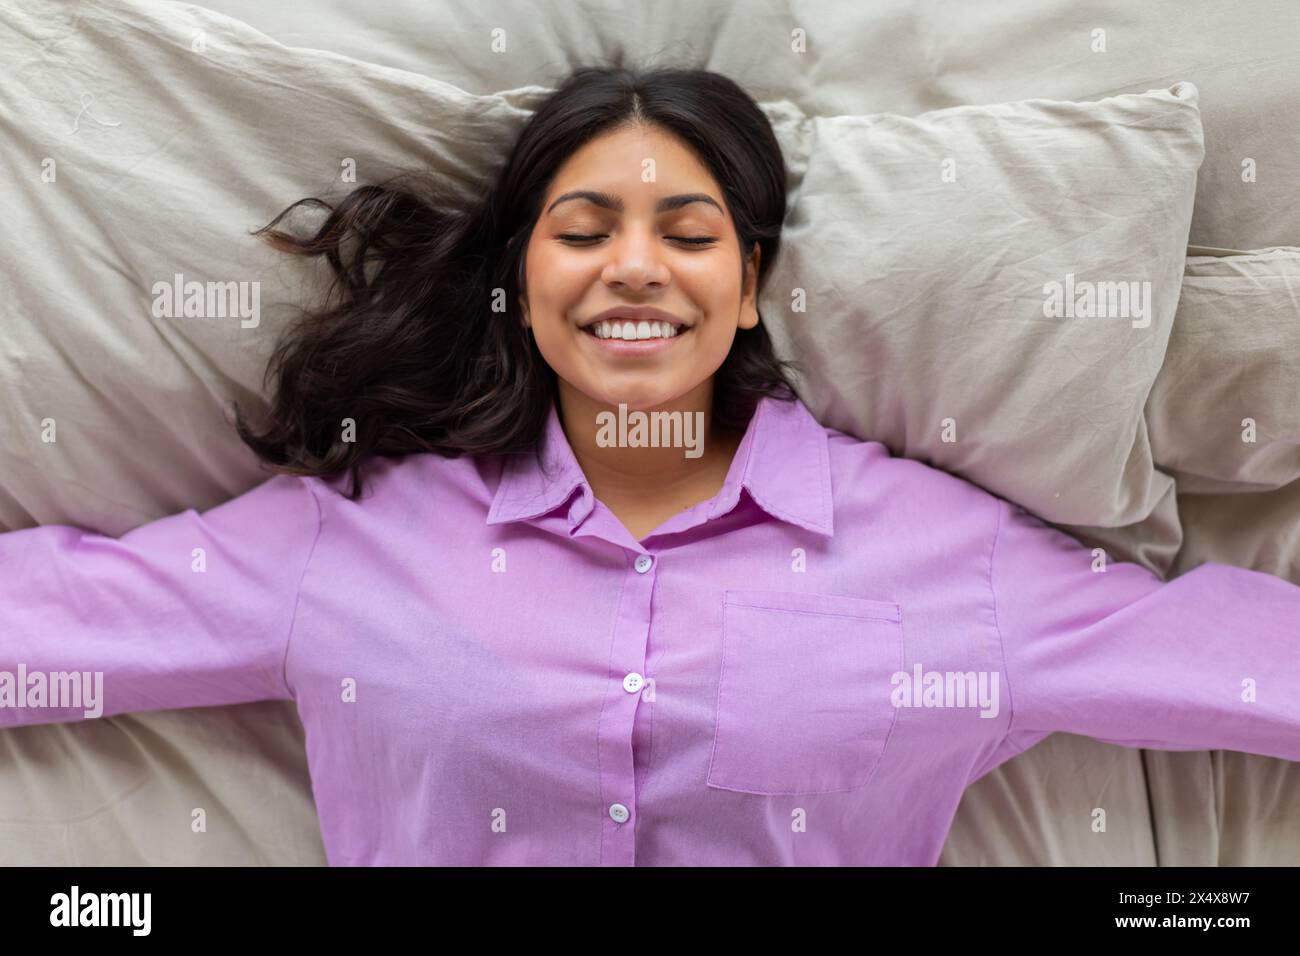 Woman Laying on Bed With Arms Outstretched Stock Photo